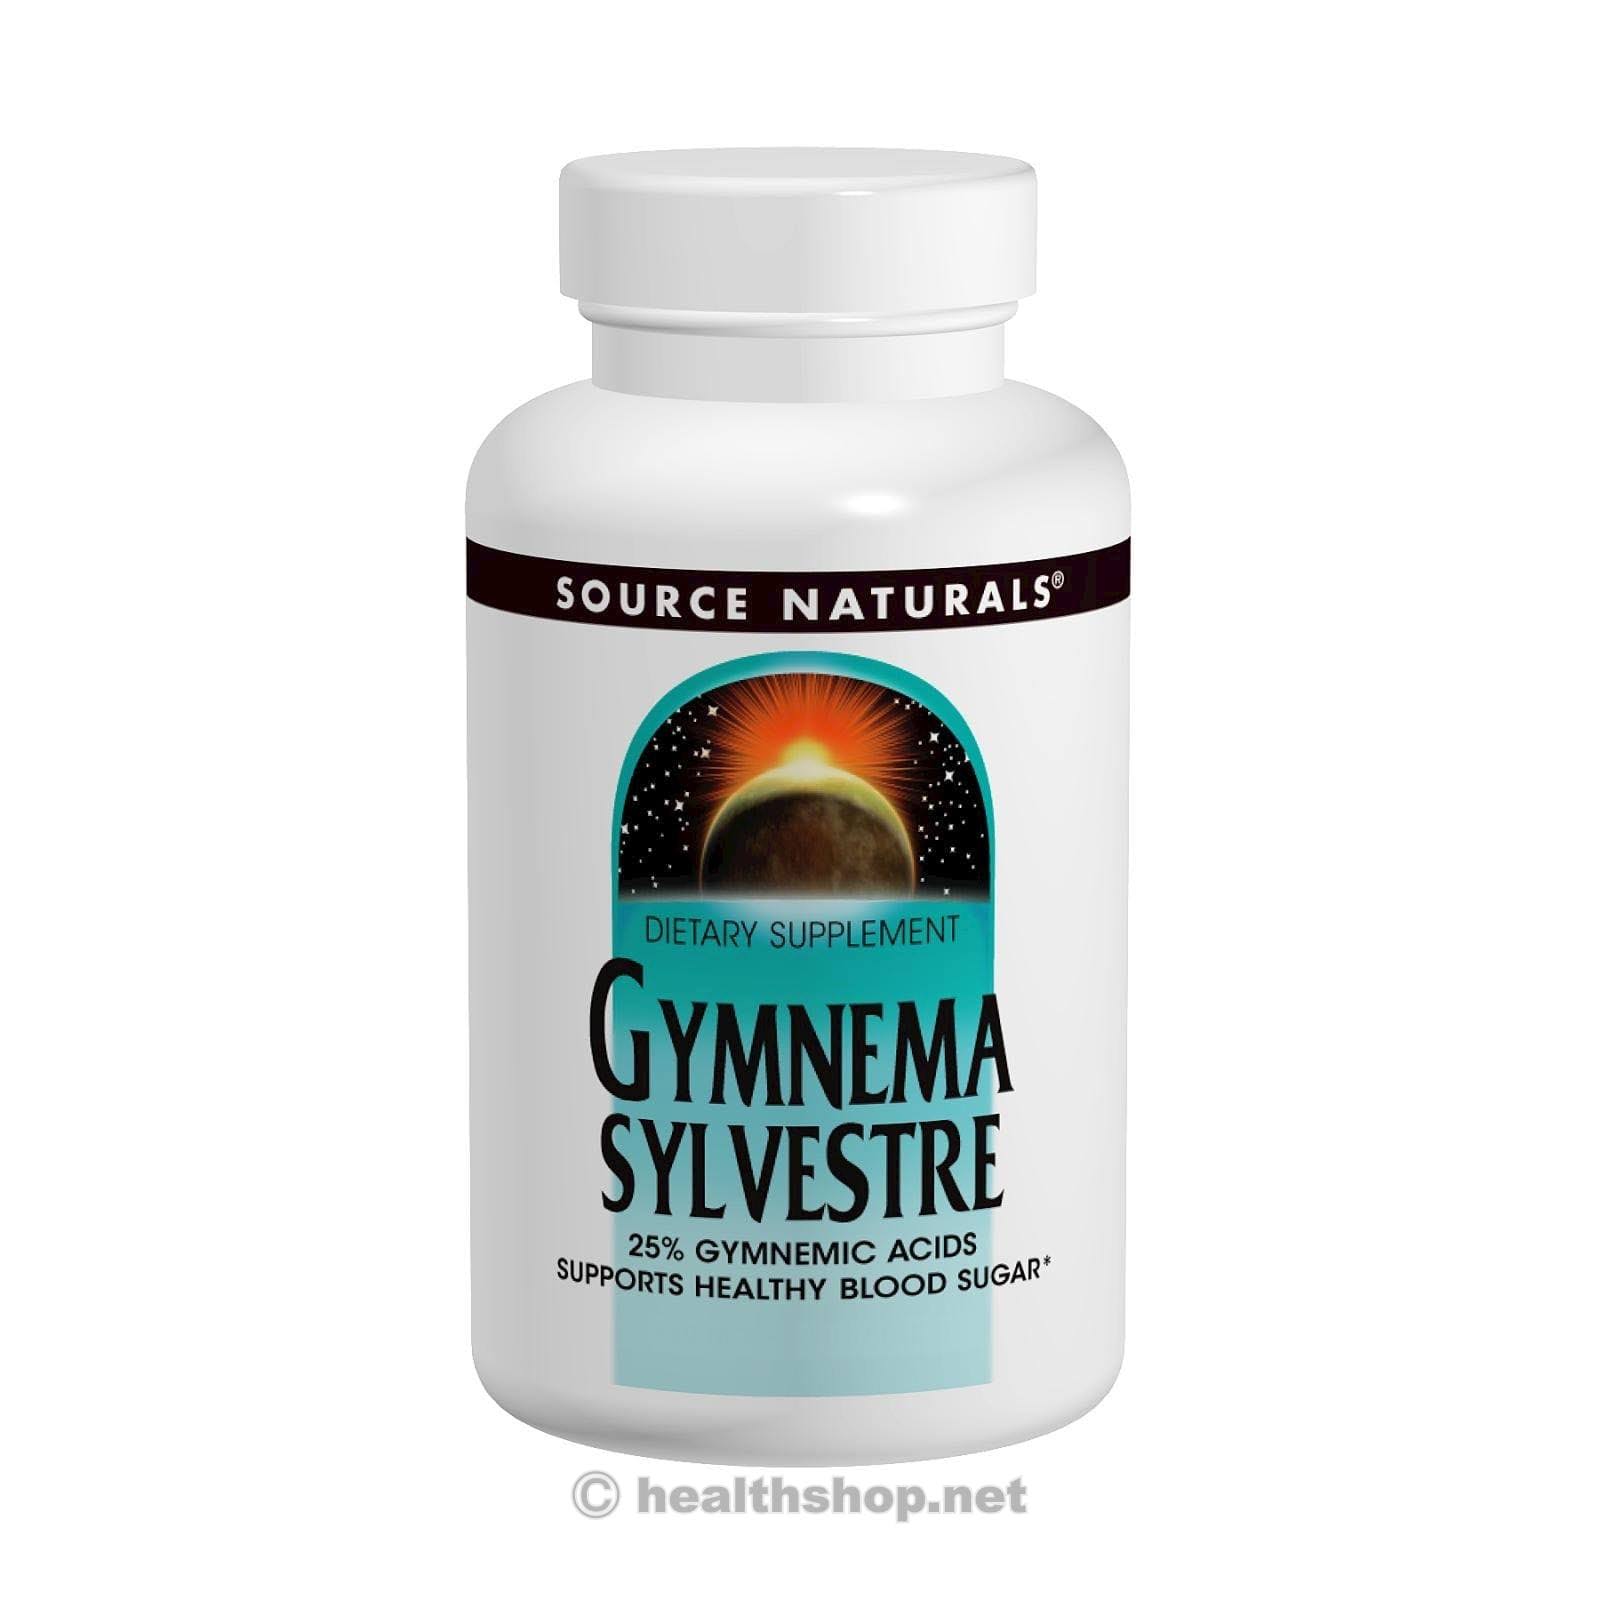 Source Naturals Gymnema Sylvestre Dietary Supplement - 450mg, 60 Tablets